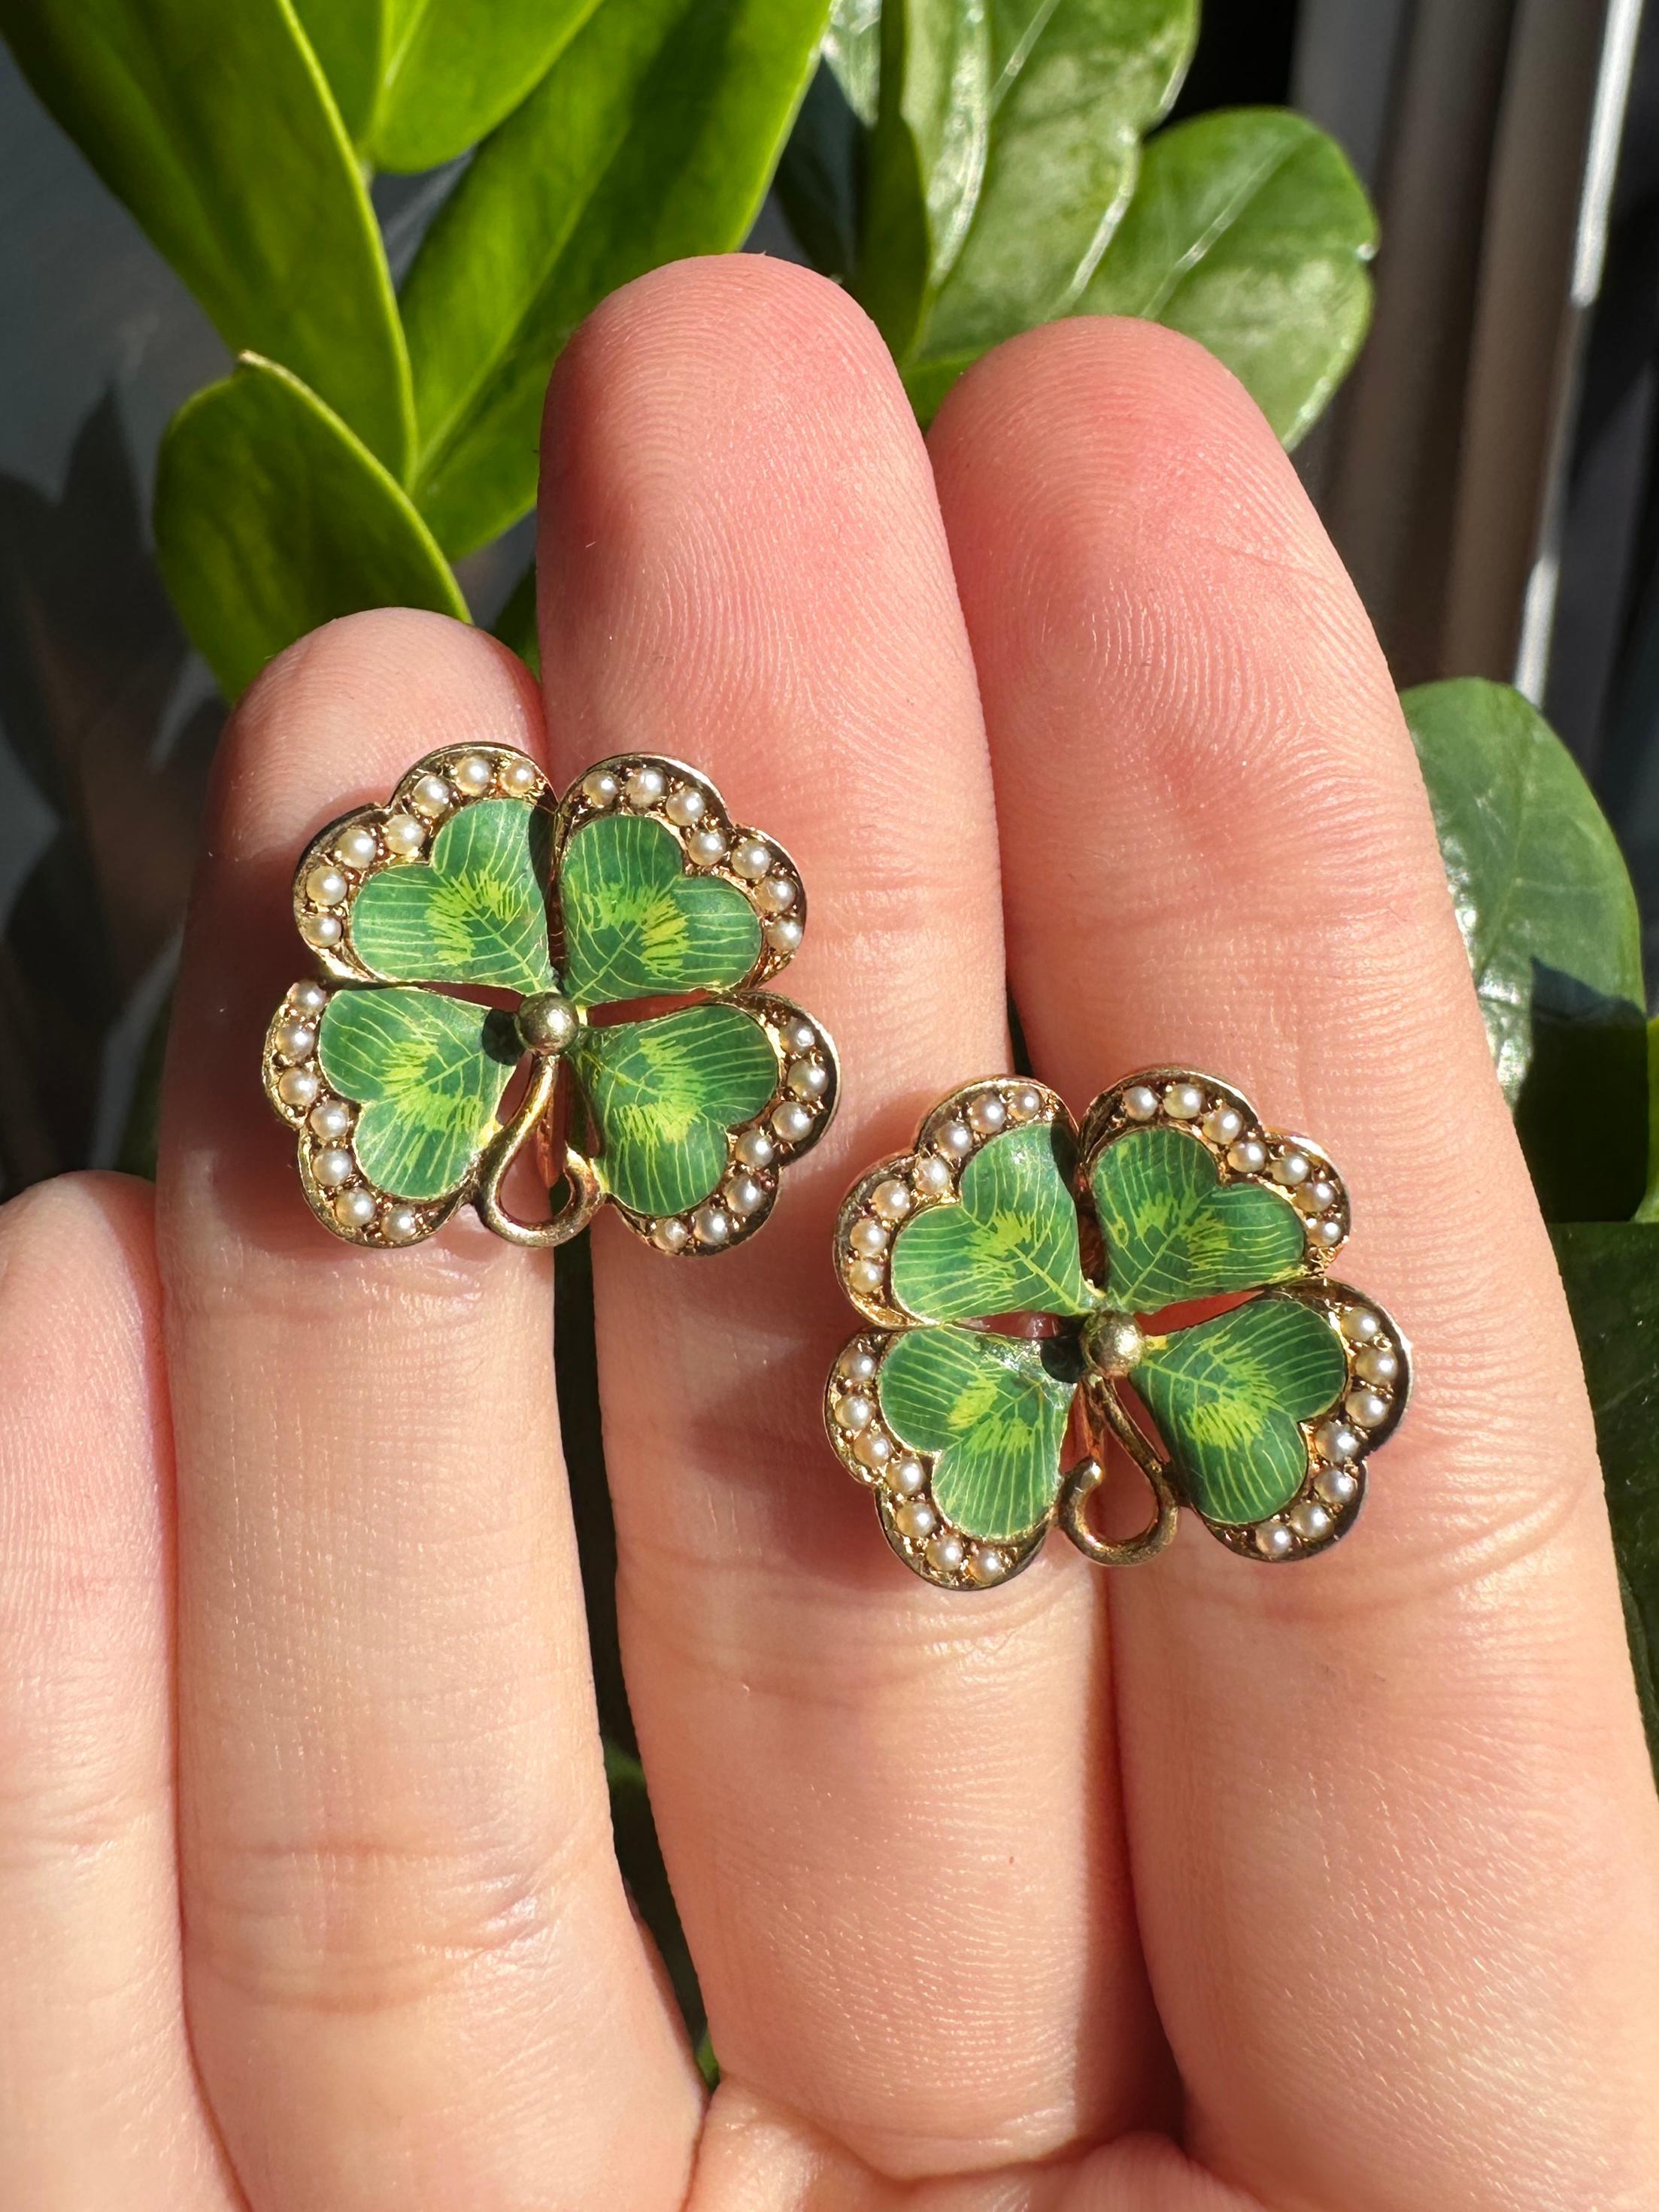 Bring a touch of Victorian charm to your wardrobe with these stunning 14k Victorian Enamel and Seed Pearl 4 Leaf Clover Ear Clips. Made of 14k yellow gold, these ear clips feature delicate enamel details and sparkling seed pearls. In good condition